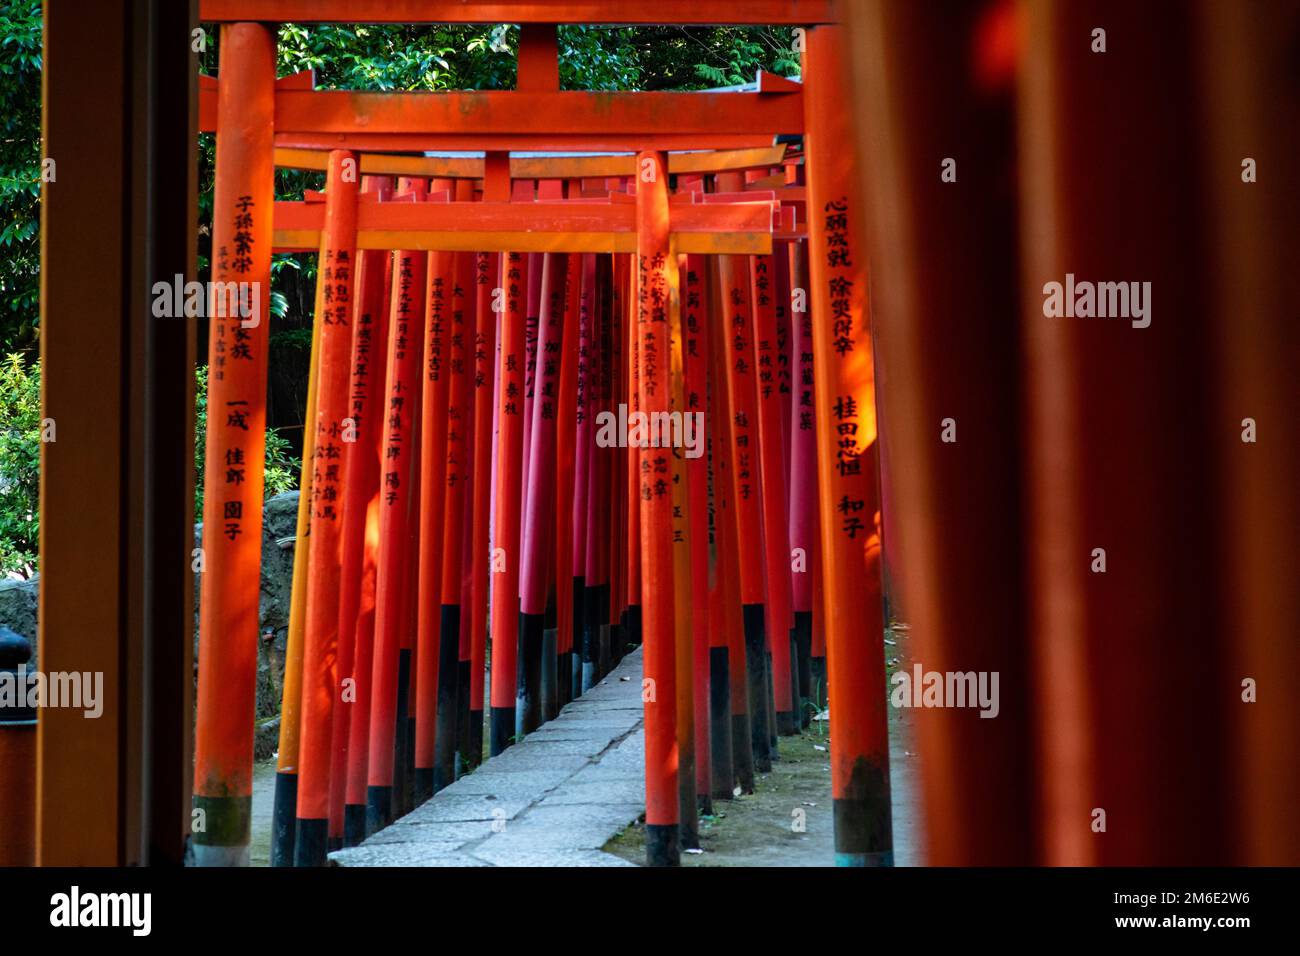 Tokyo, Japan - 9 8 2019: The rows of red 'torii' archways in Nezu shrine Stock Photo